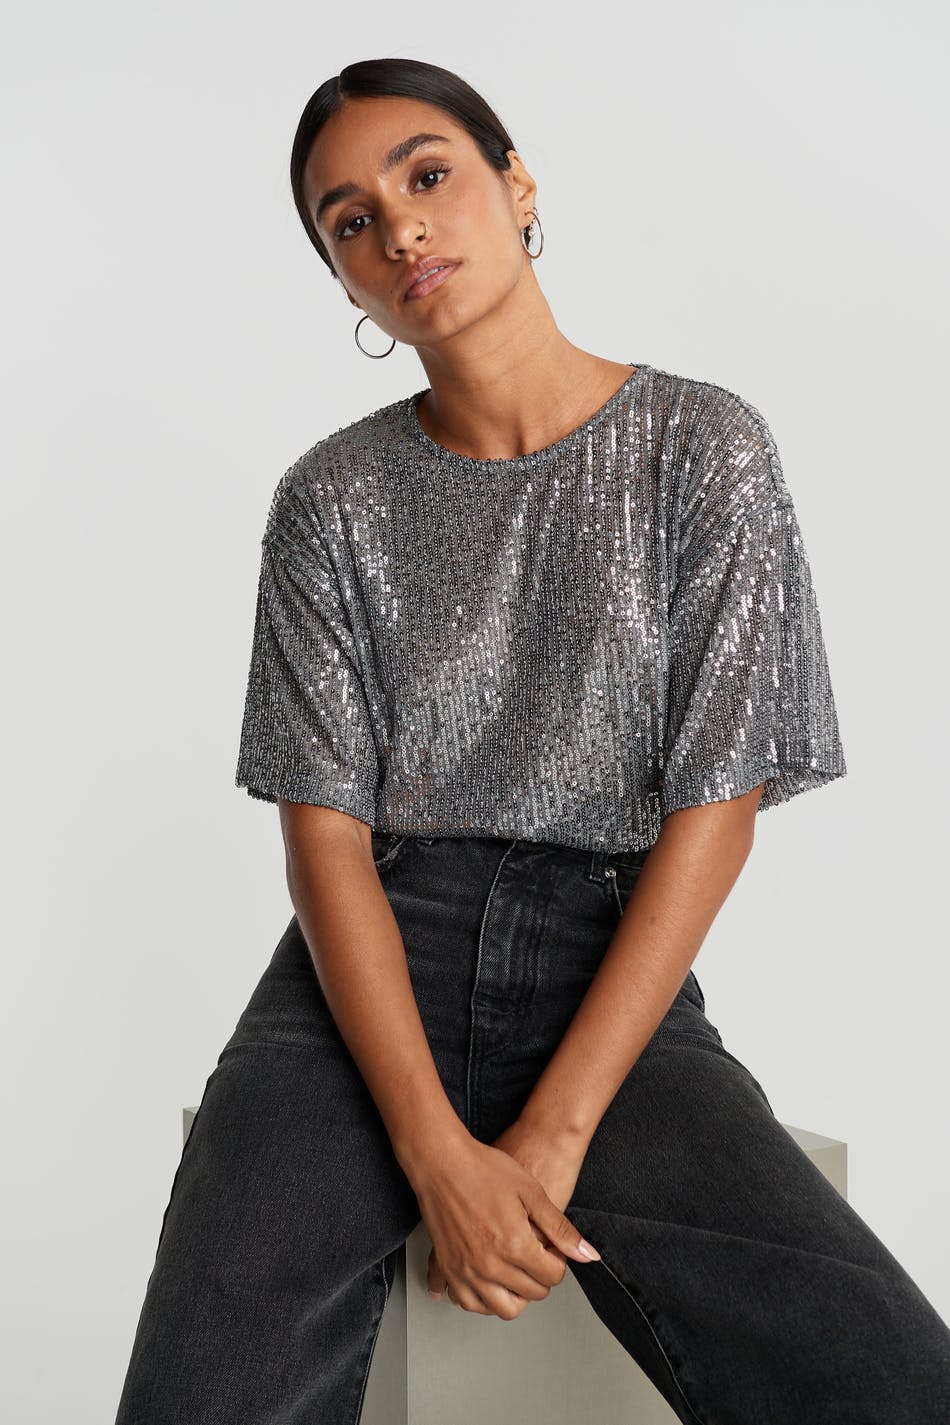 Rudy sequins top - Gina Tricot